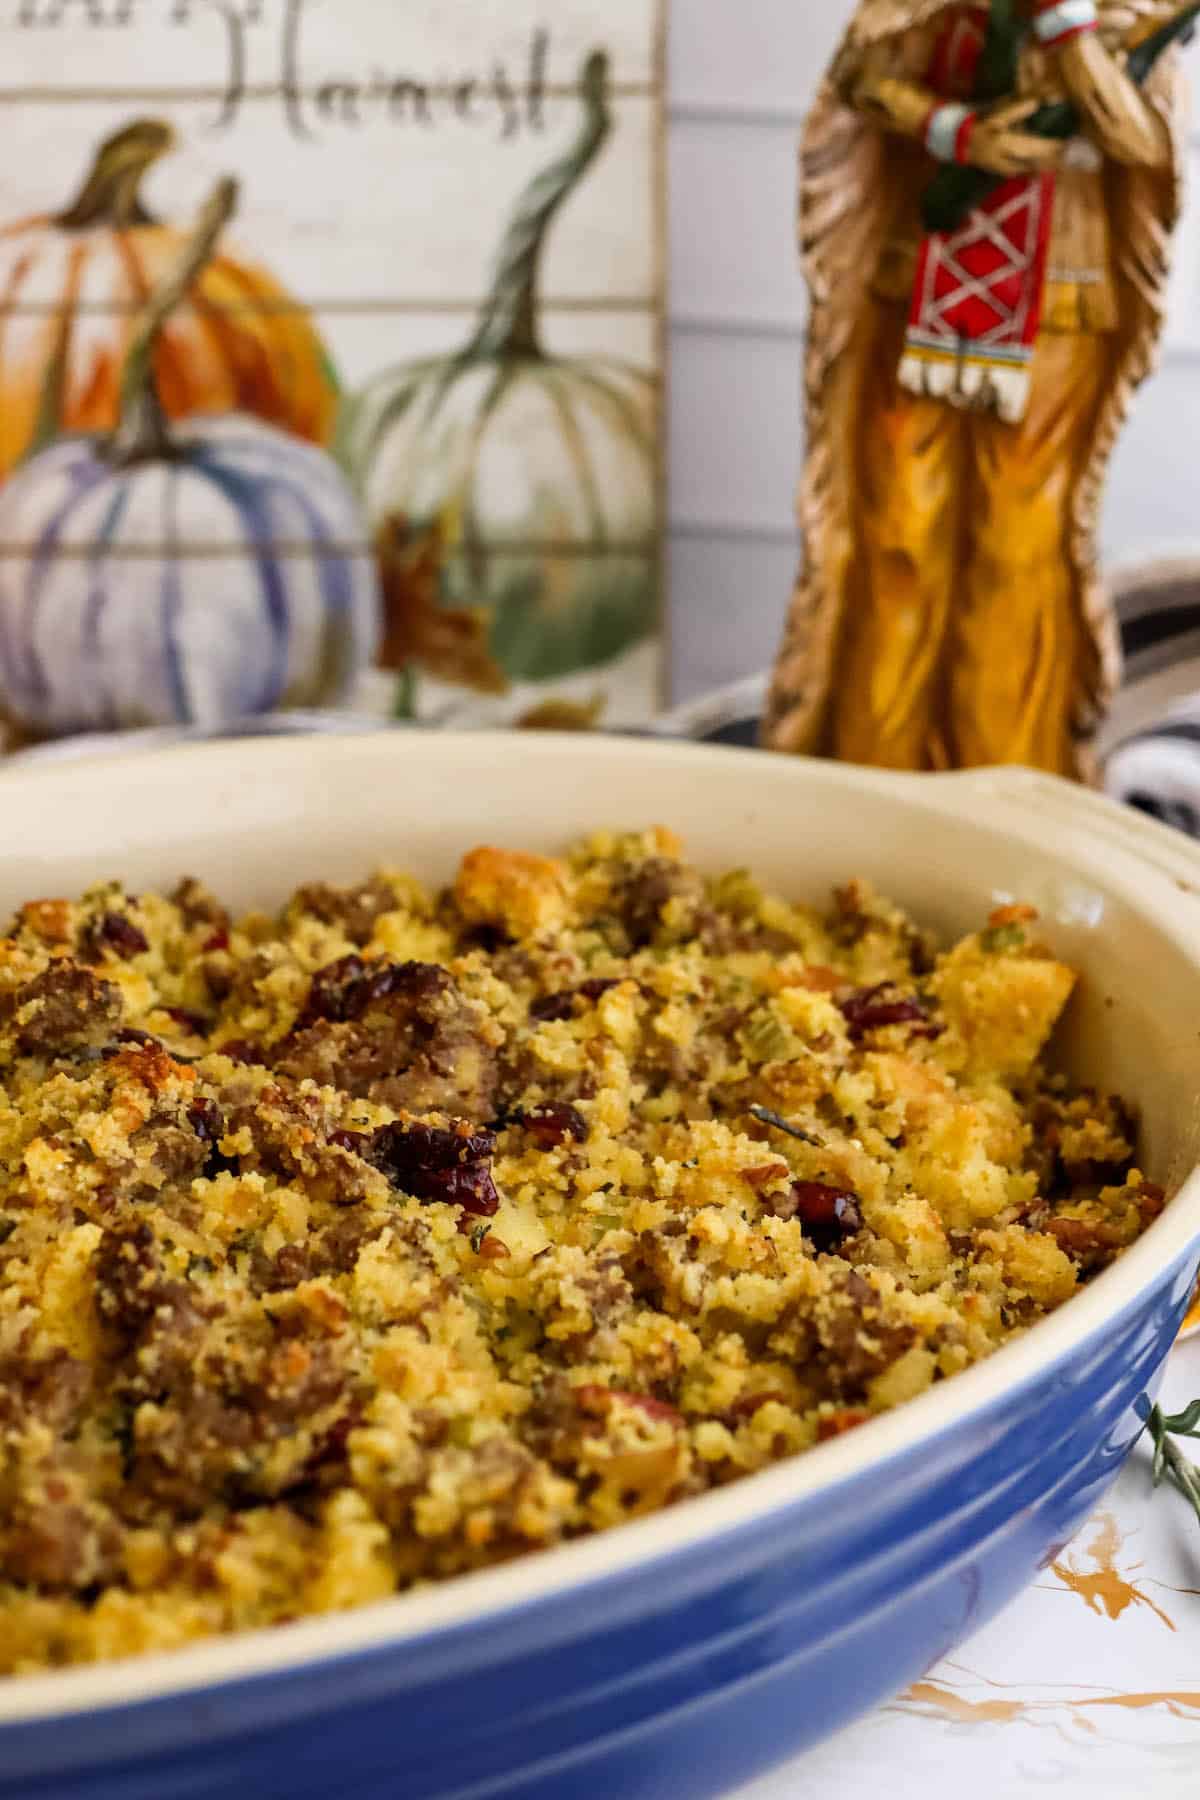 Thanksgiving sausage stuffing in a blue and white dish.